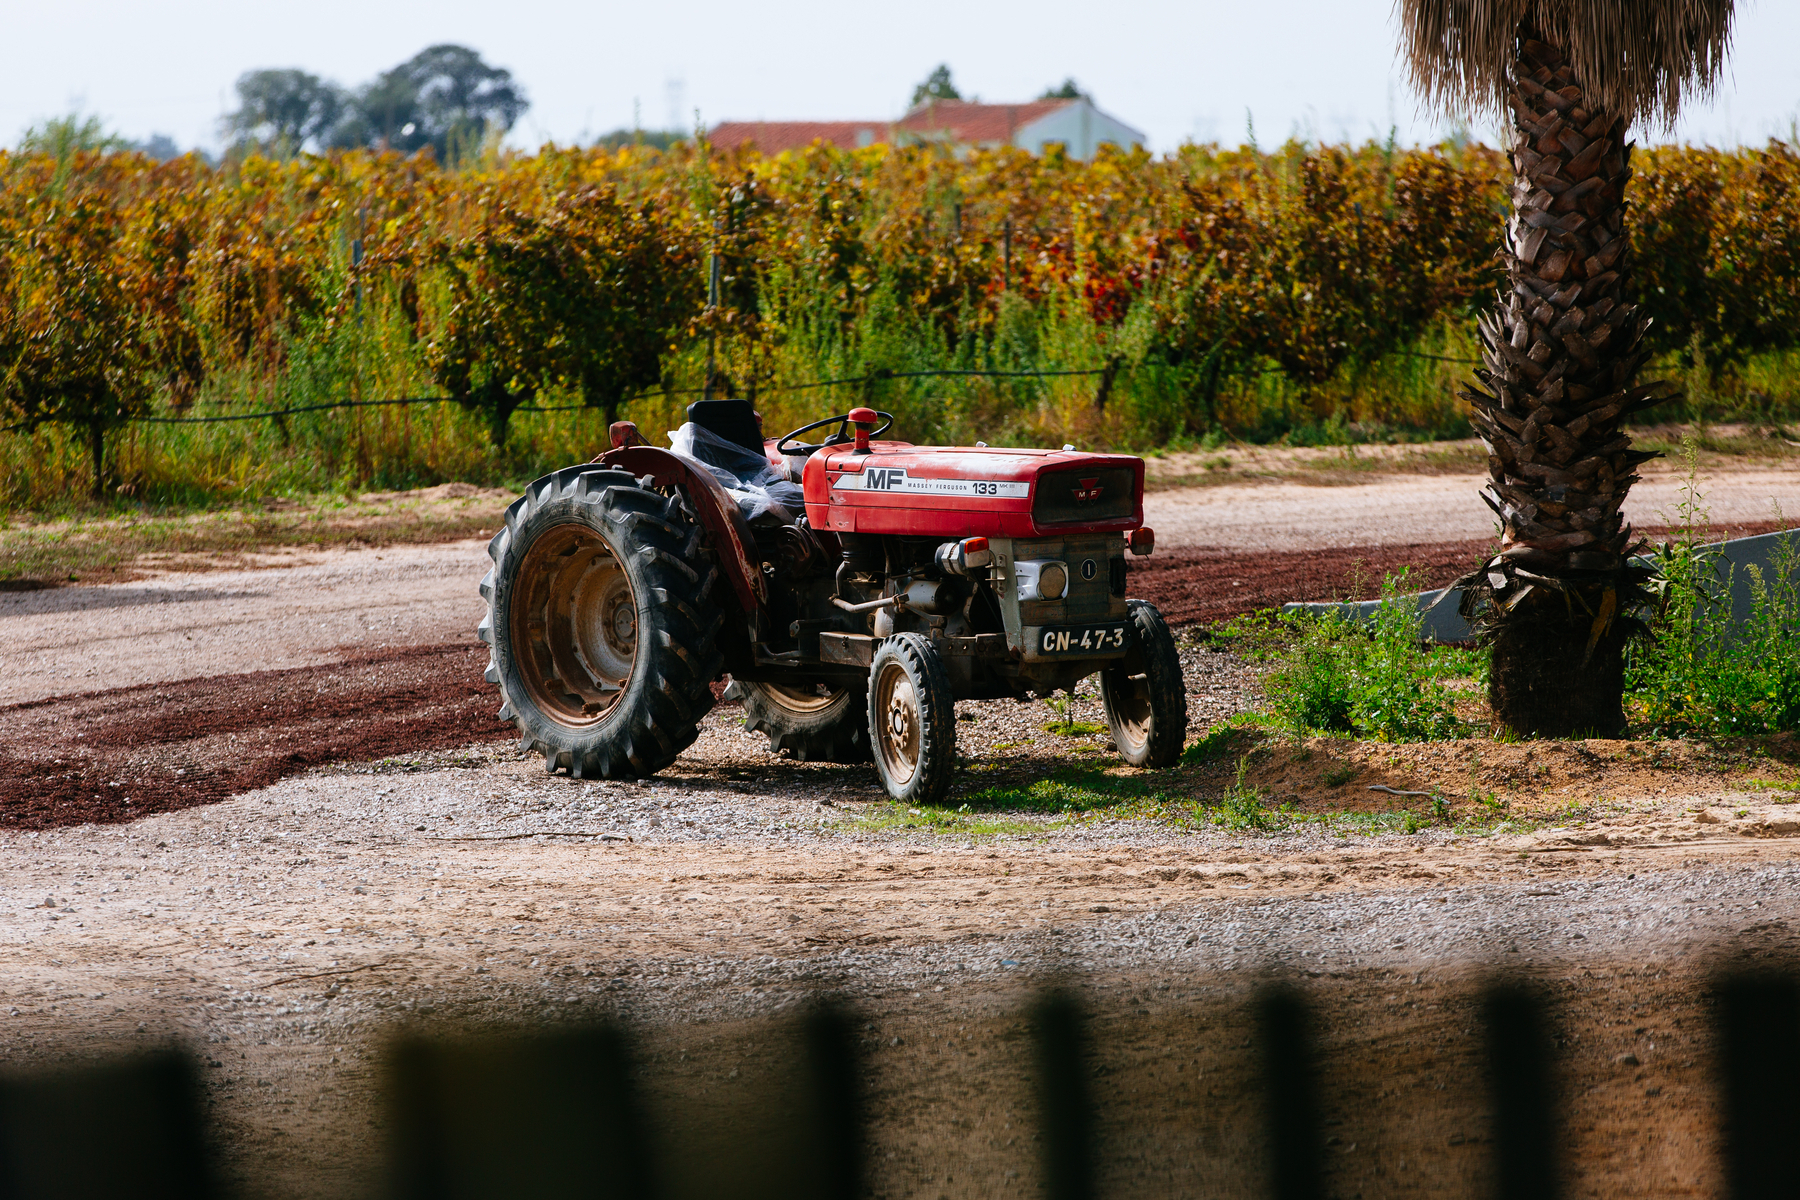 A lonely vintage tractor parked by a palm tree, vineyard in the back 